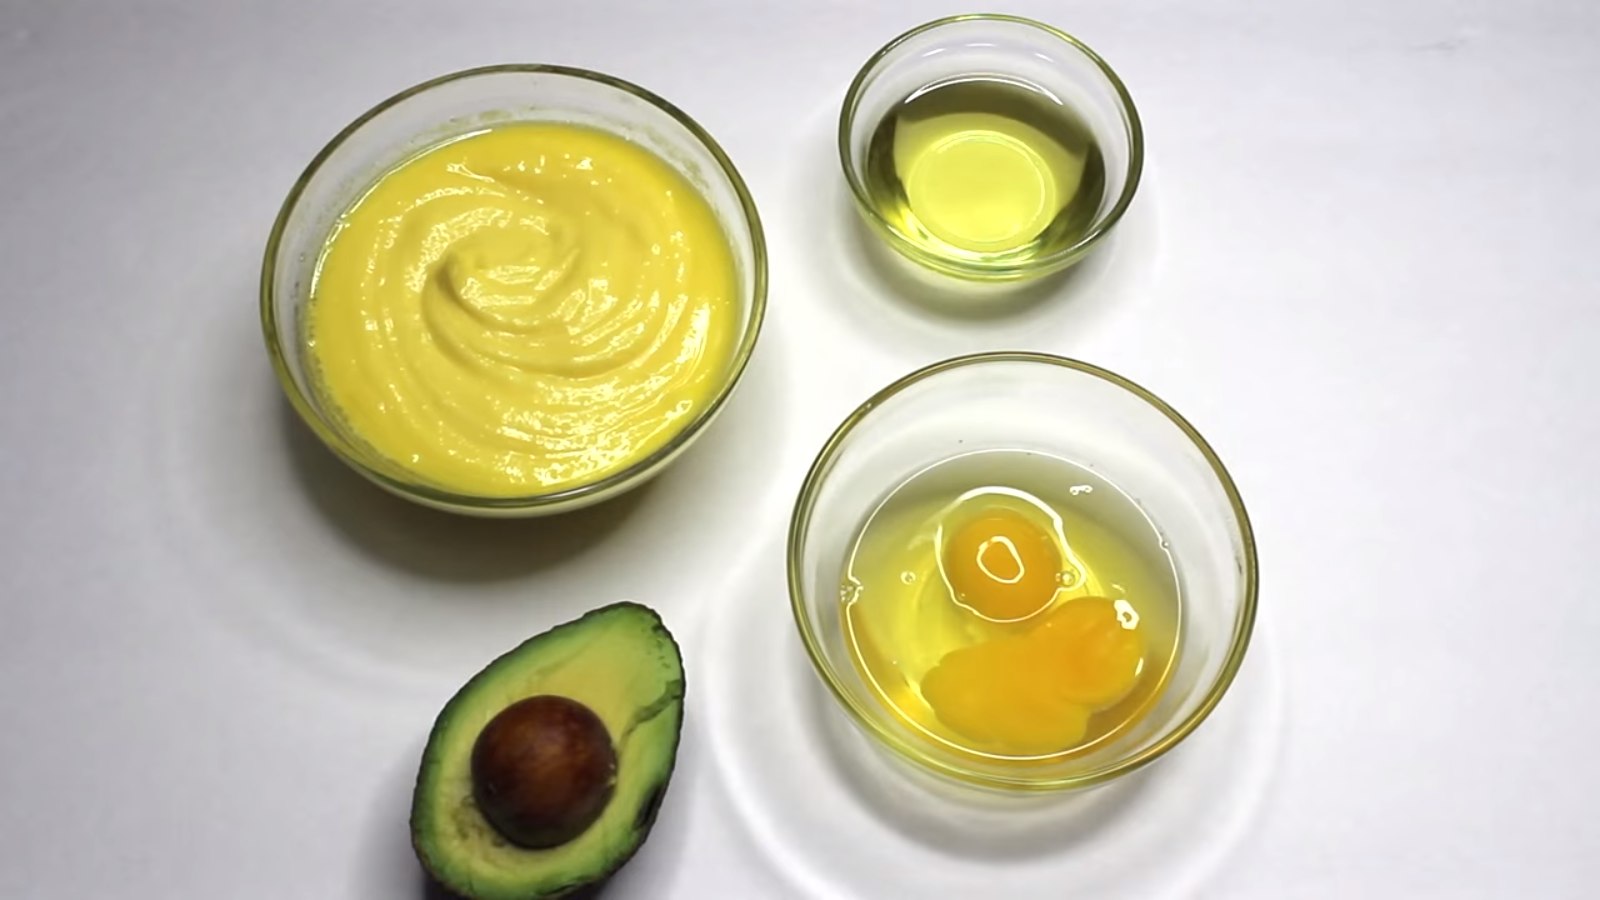 DIY Hair Mask With Organic Mayo And Avocado For Natural Hair Conditioning,  Strength & Growth ⋆ African American Hairstyle Videos - AAHV